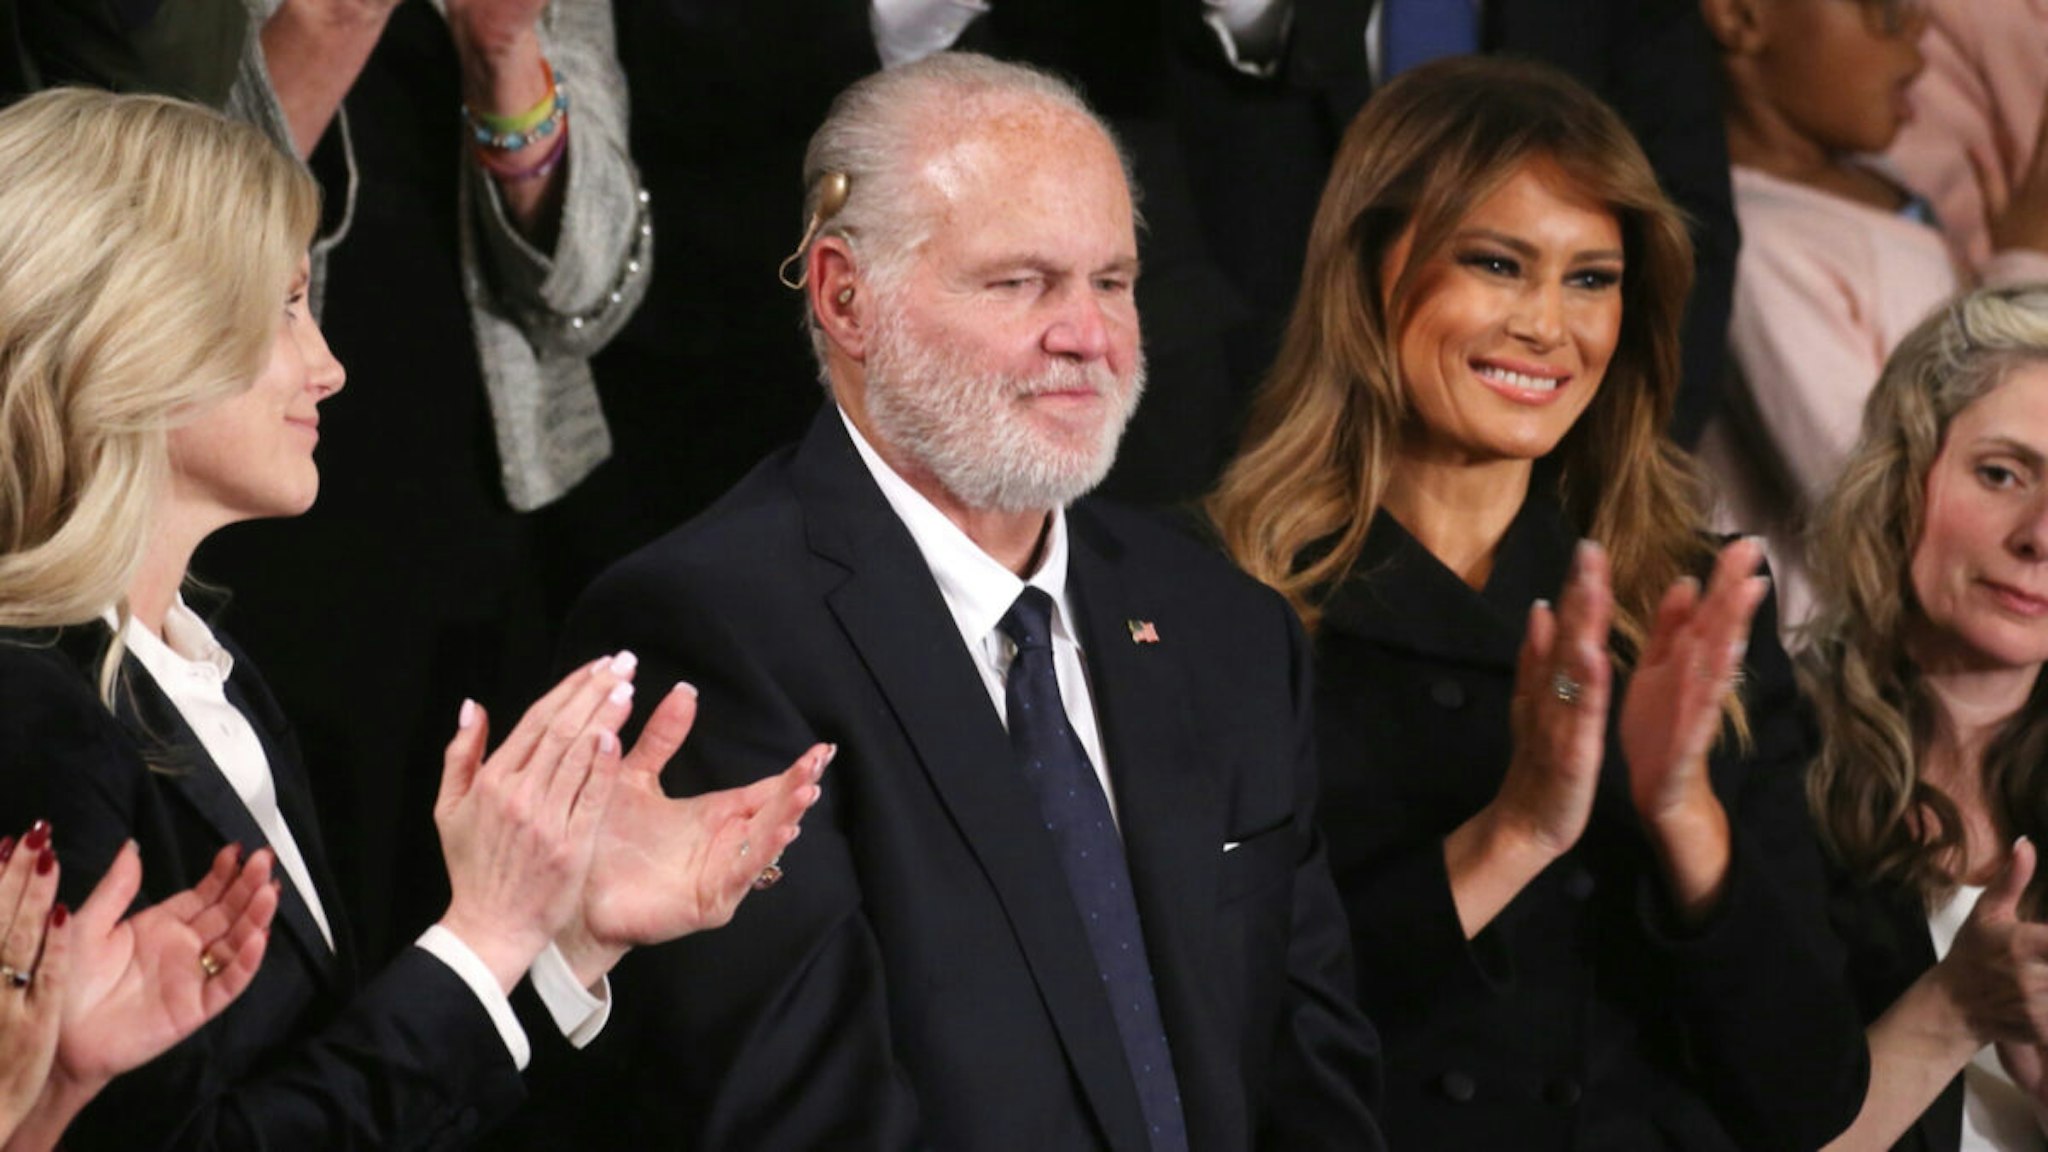 Radio personality Rush Limbaugh and wife Kathryn (L) attend the State of the Union address with First Lady Melania Trump in the chamber of the U.S. House of Representatives on February 04, 2020 in Washington, DC.